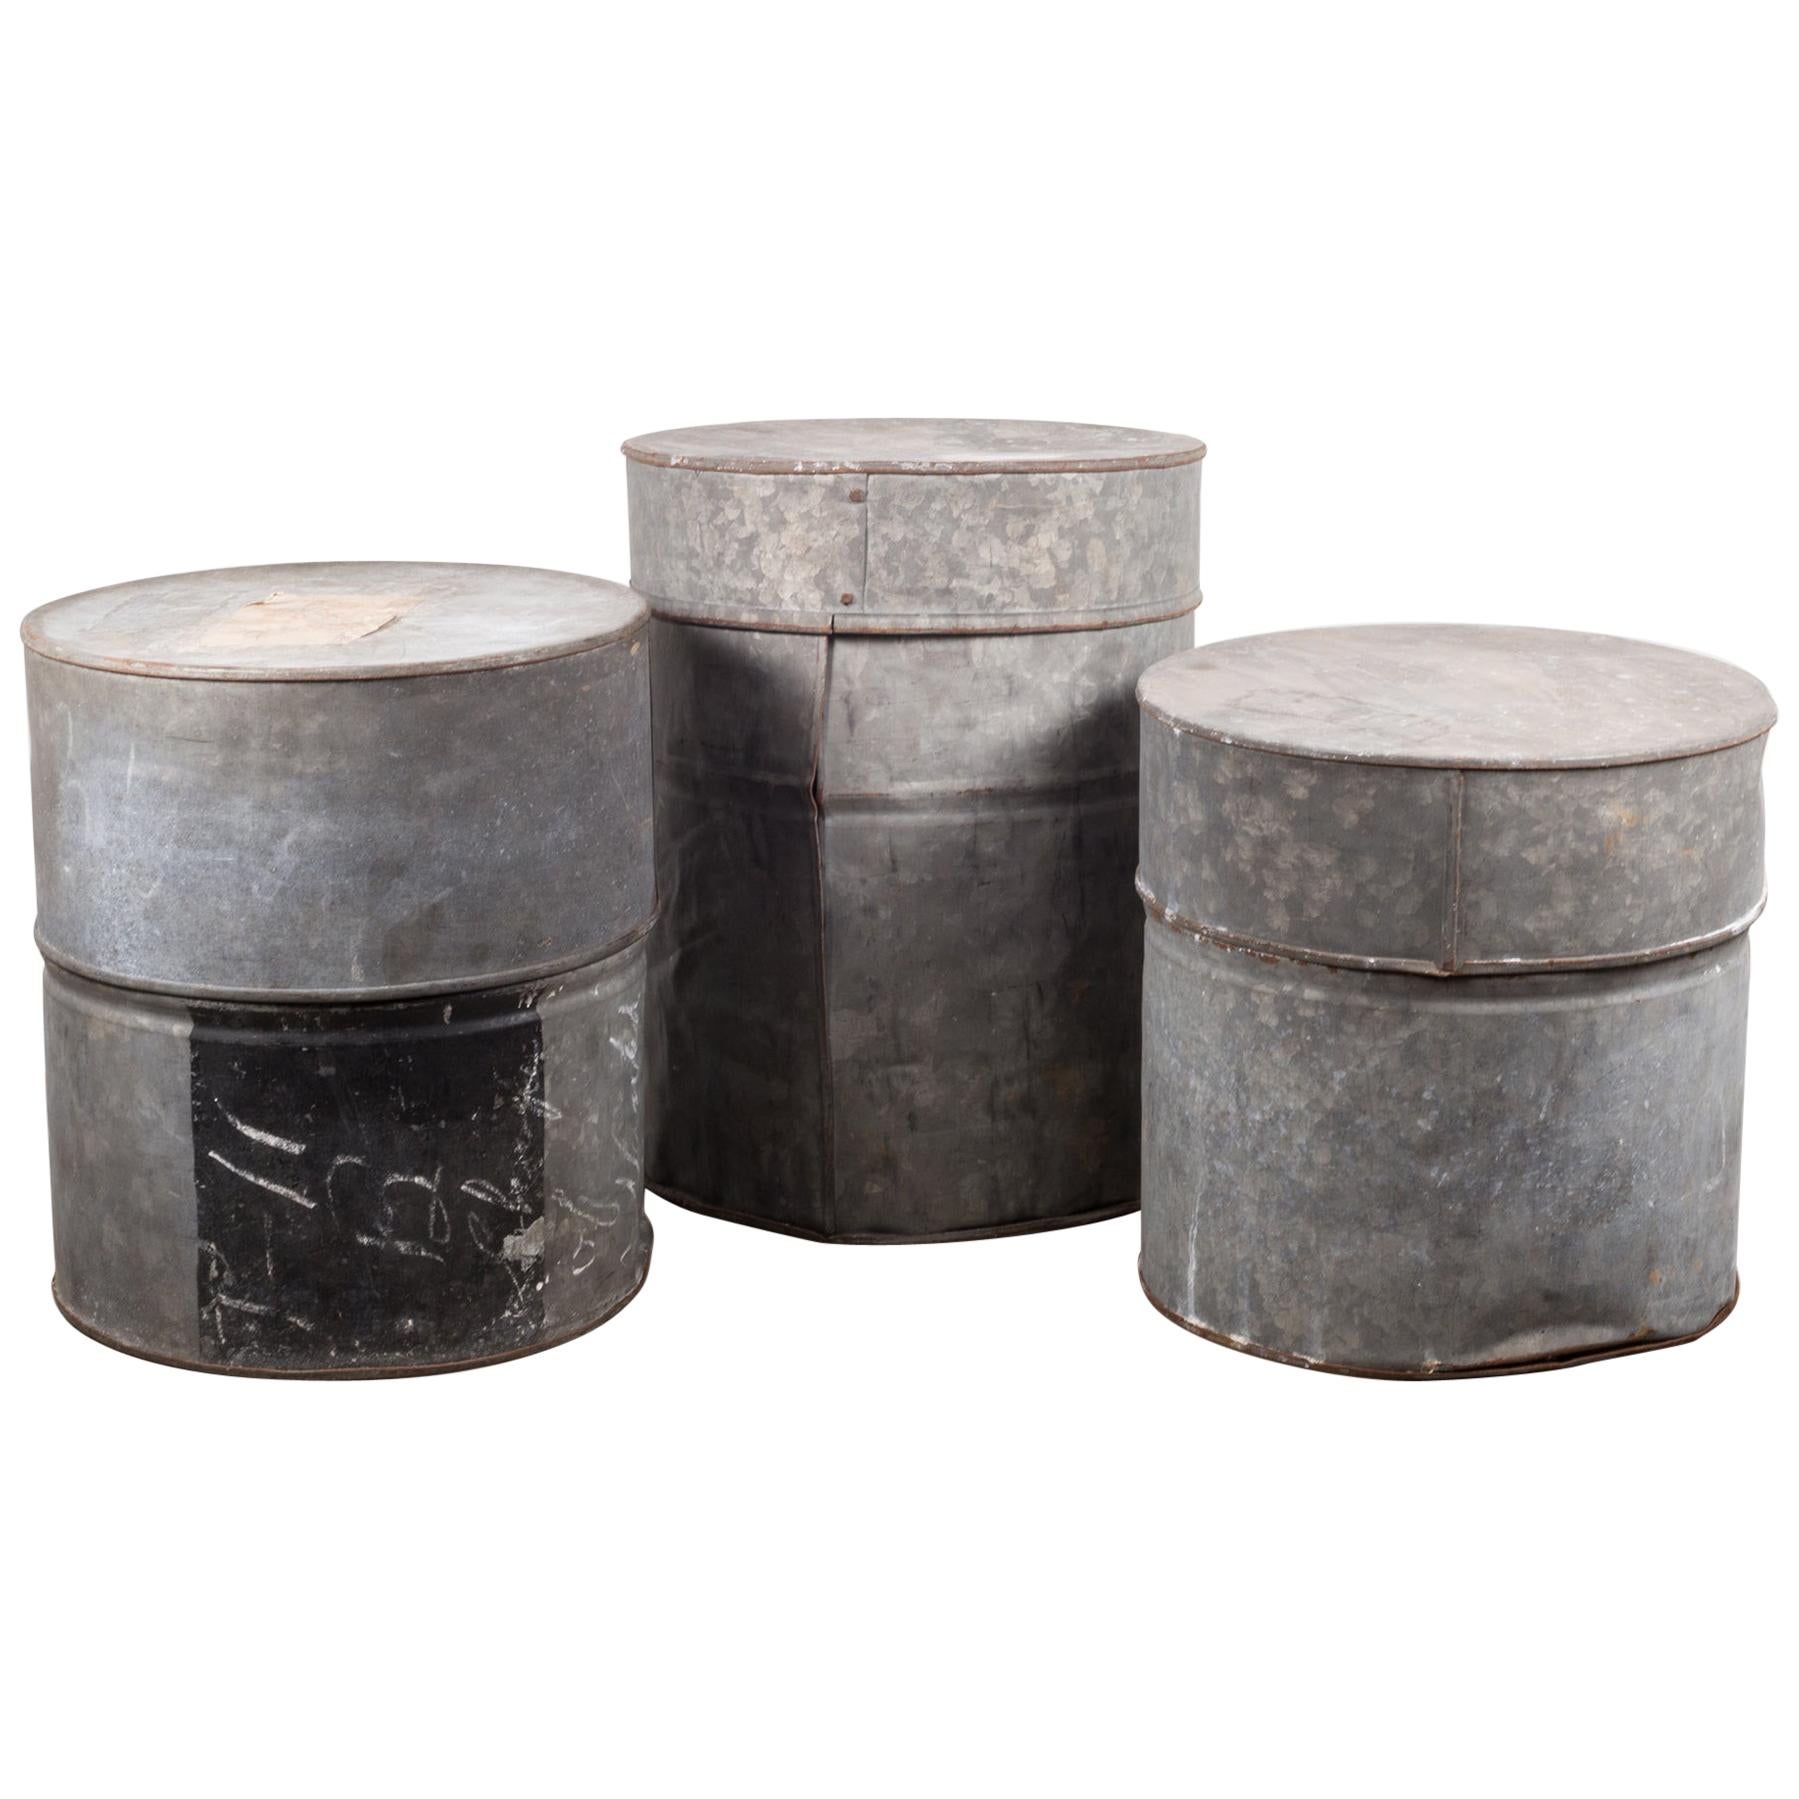 Antique Metal Movie Reel Canisters, circa 1930